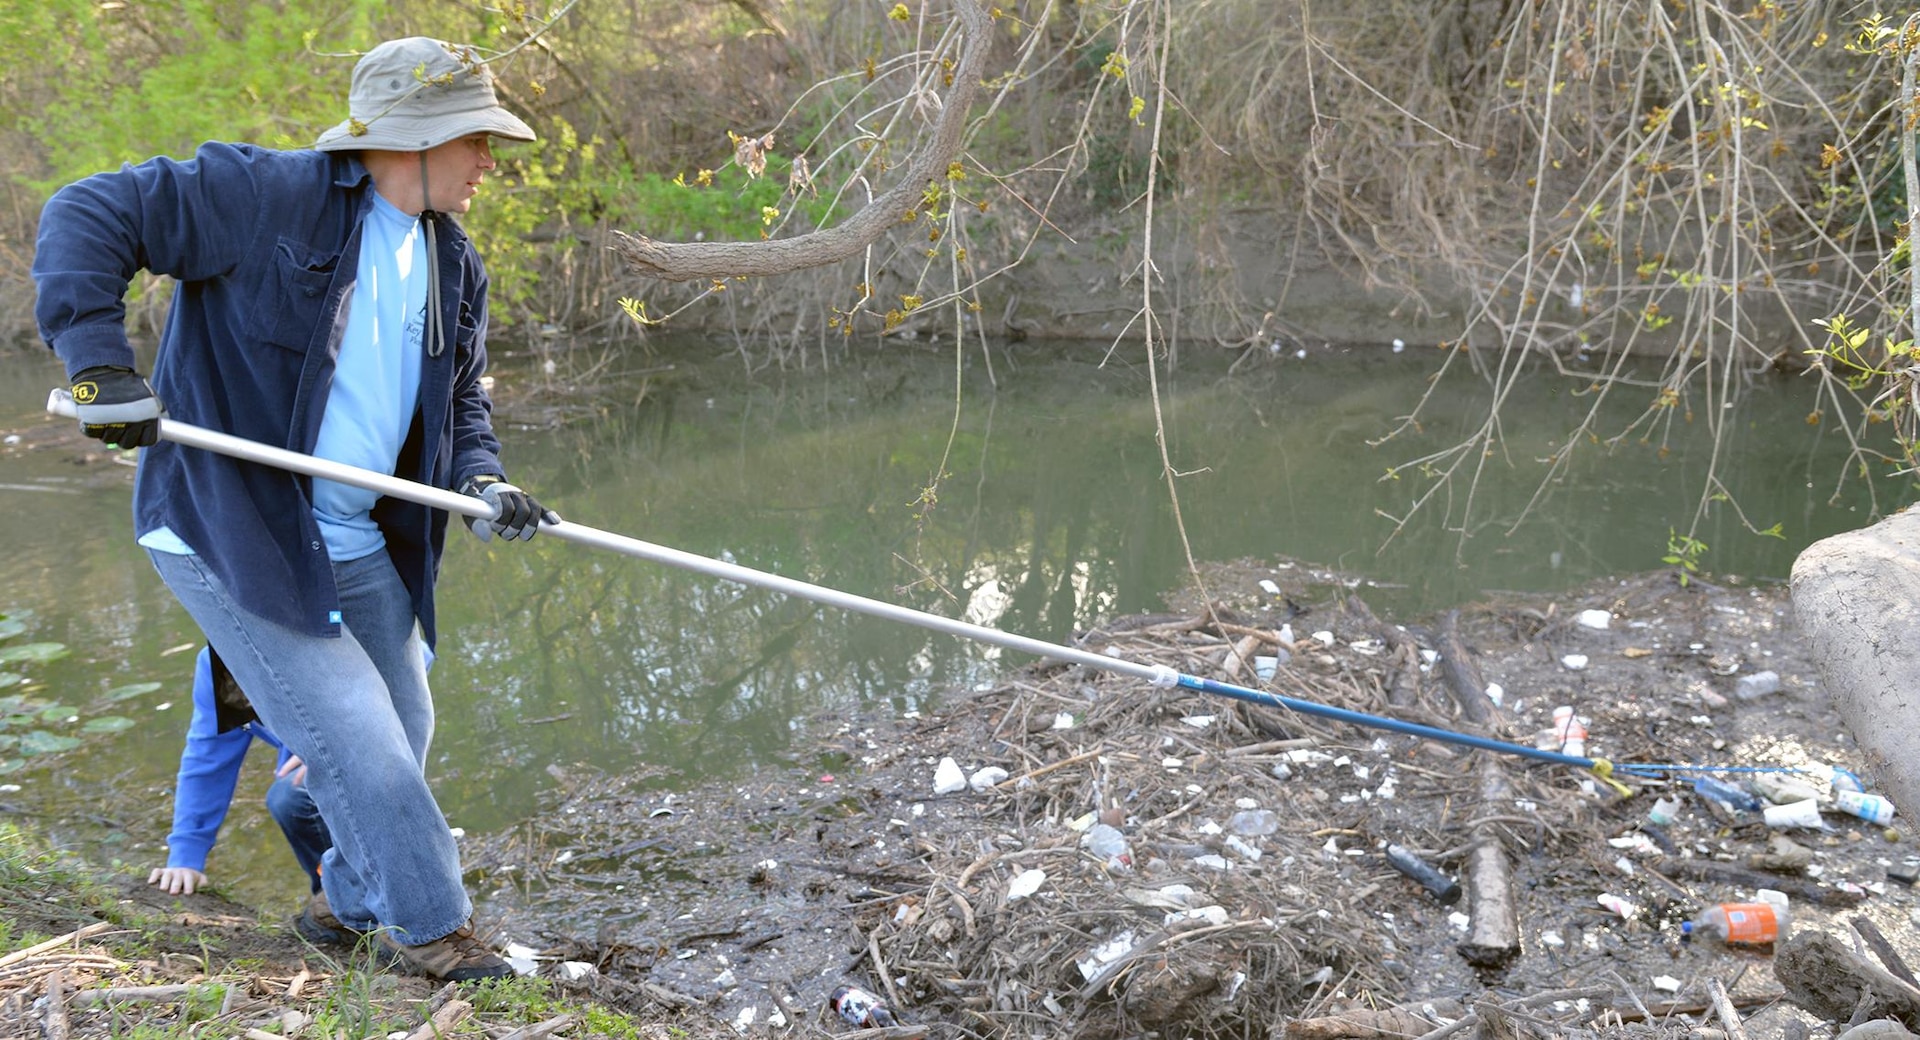 Col. Dave Abraham from U.S. Army South reaches to extract debris from Salado Creek at Joint Base San Antonio-Fort Sam Houston Feb. 17 during the 2017 Basura Bash.